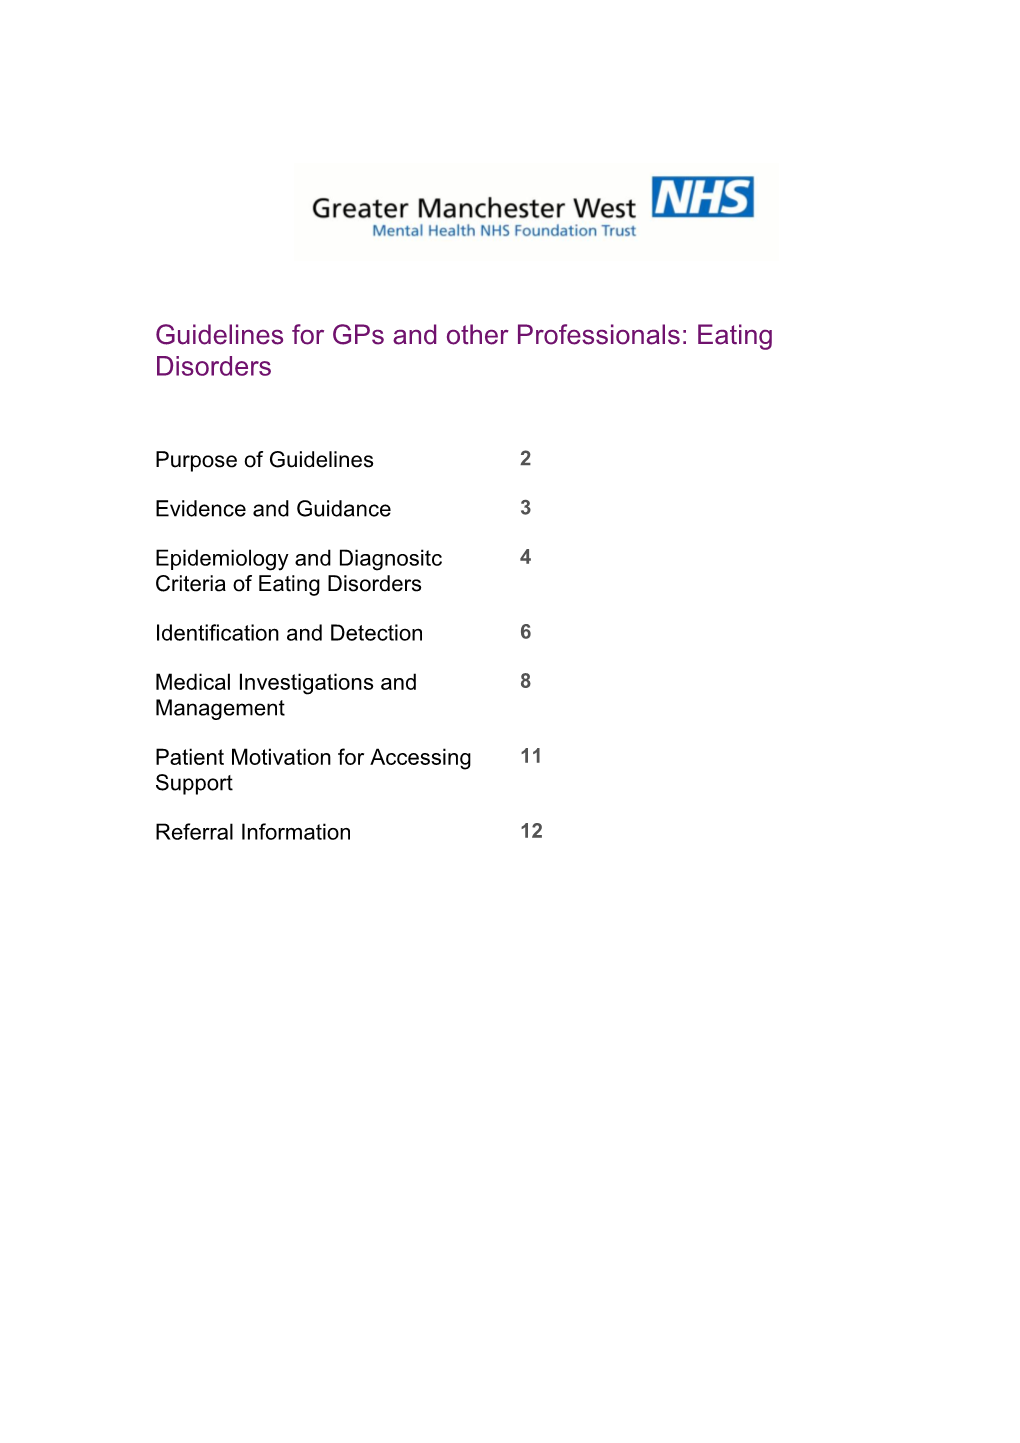 Guidelines for Gps and Other Professionals: Eating Disorders